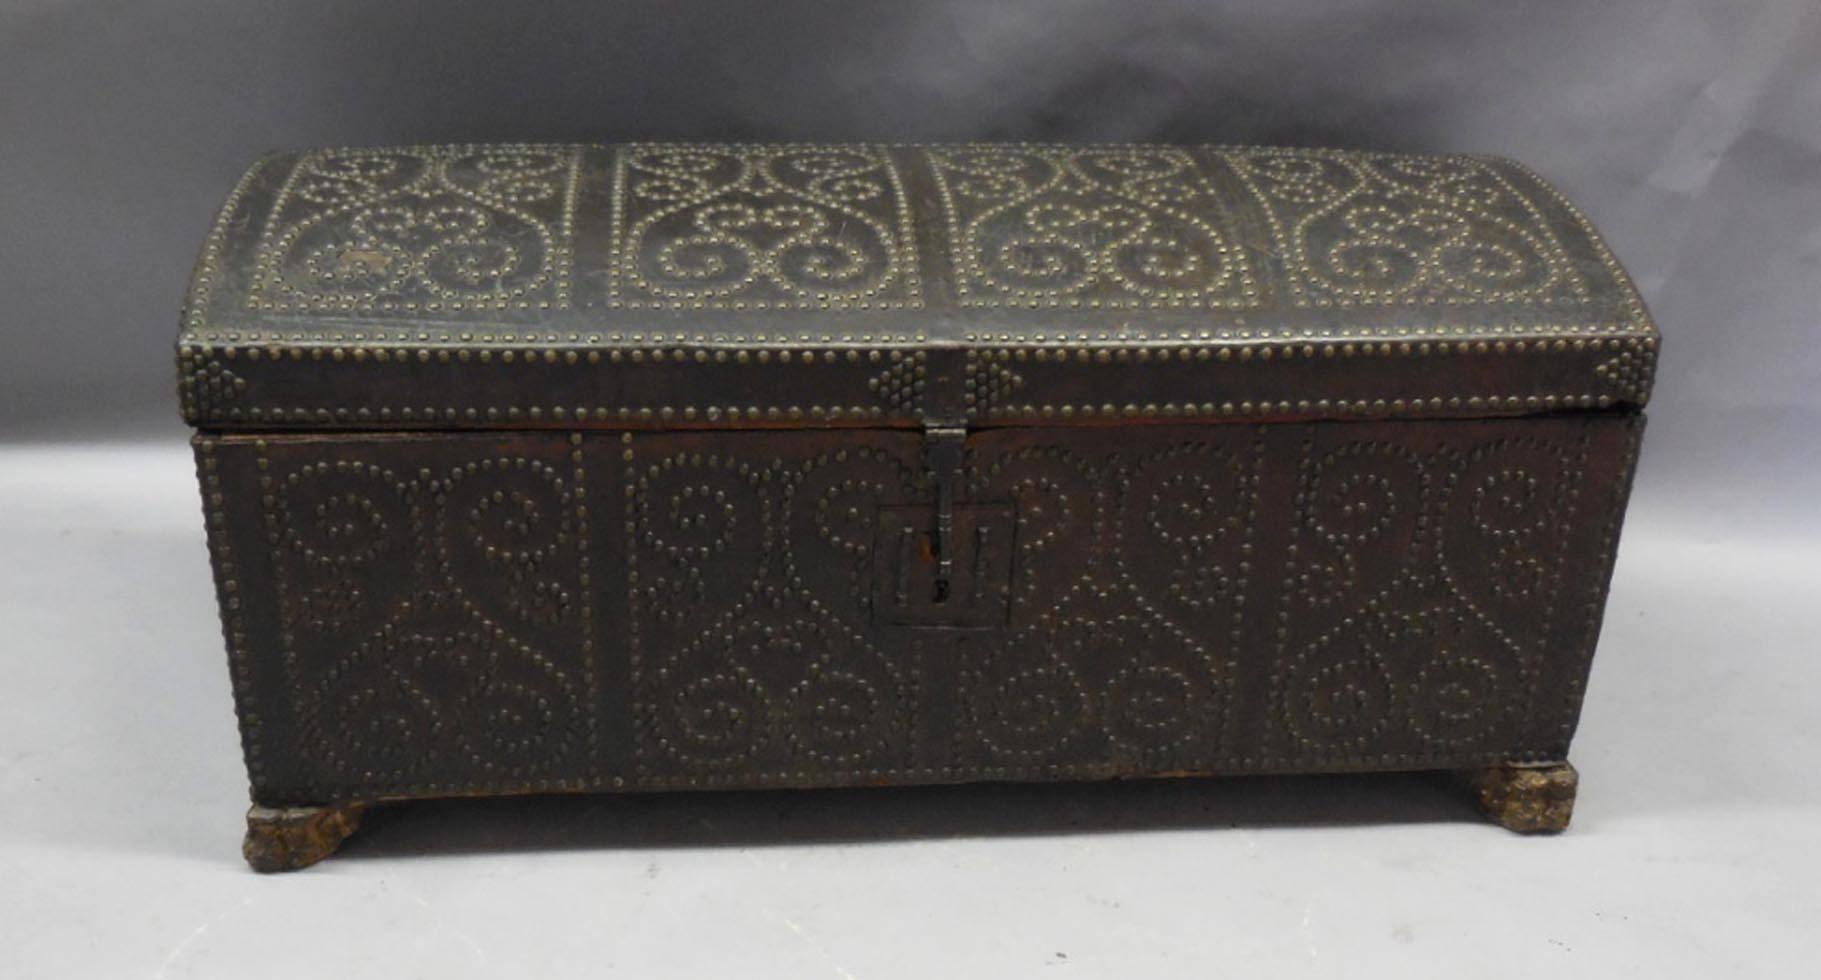 Domed leather coffer with brass studs, patterned in four quadrangles. Carved feet. All original hardware and in good condition considering its age. Some areas of leather are deteriorated but not interfering with form or function, 18th century